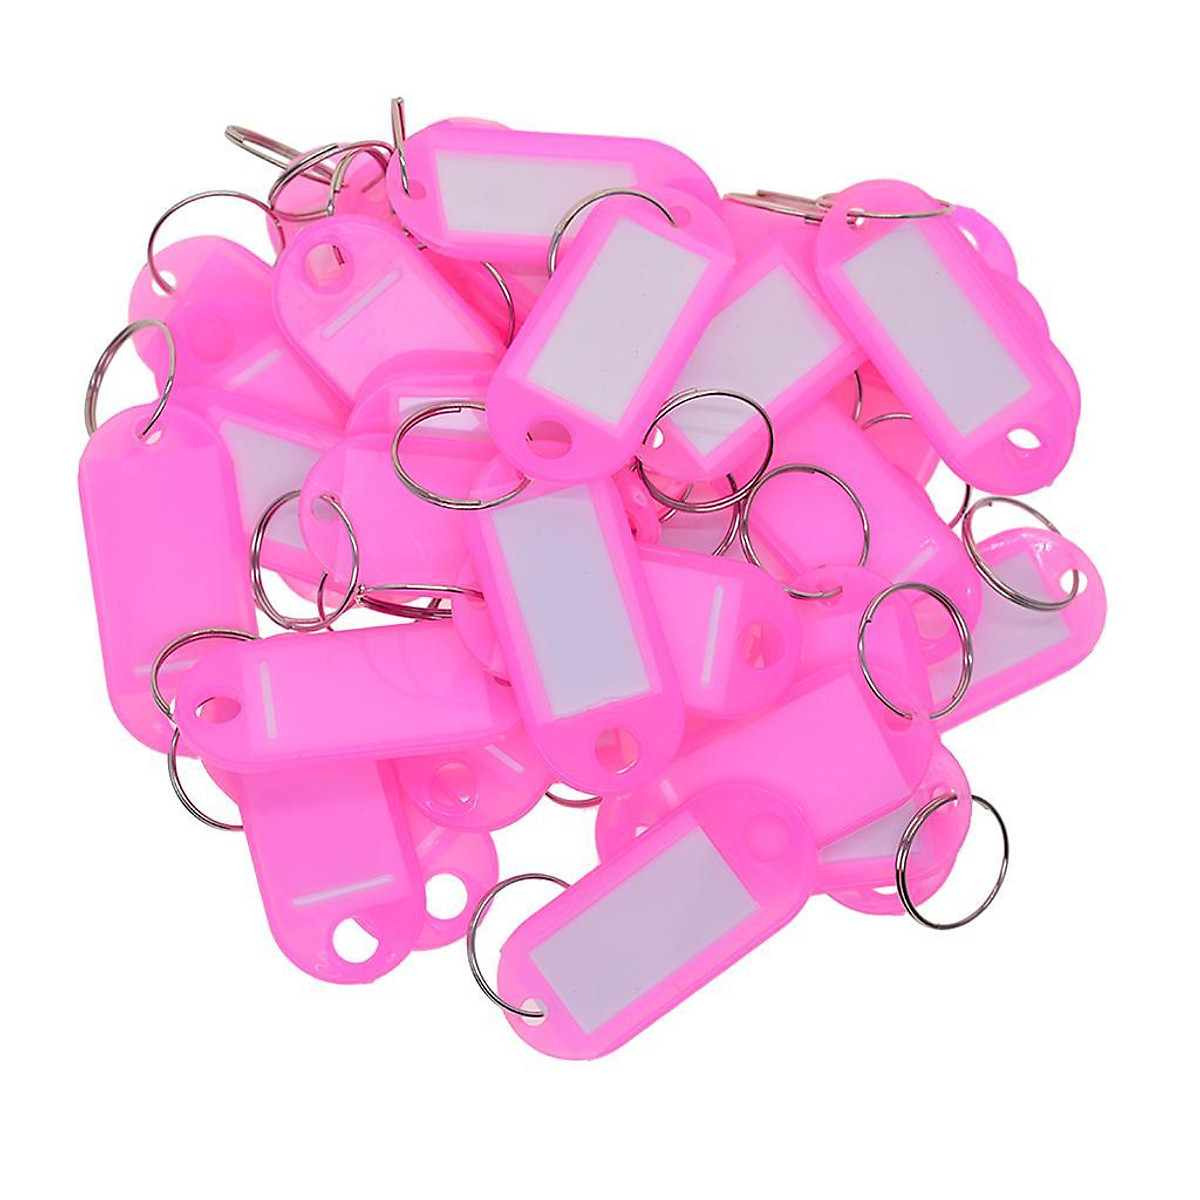 100Pcs Labeling Tags Blank Gift Tags with String Attached Marking